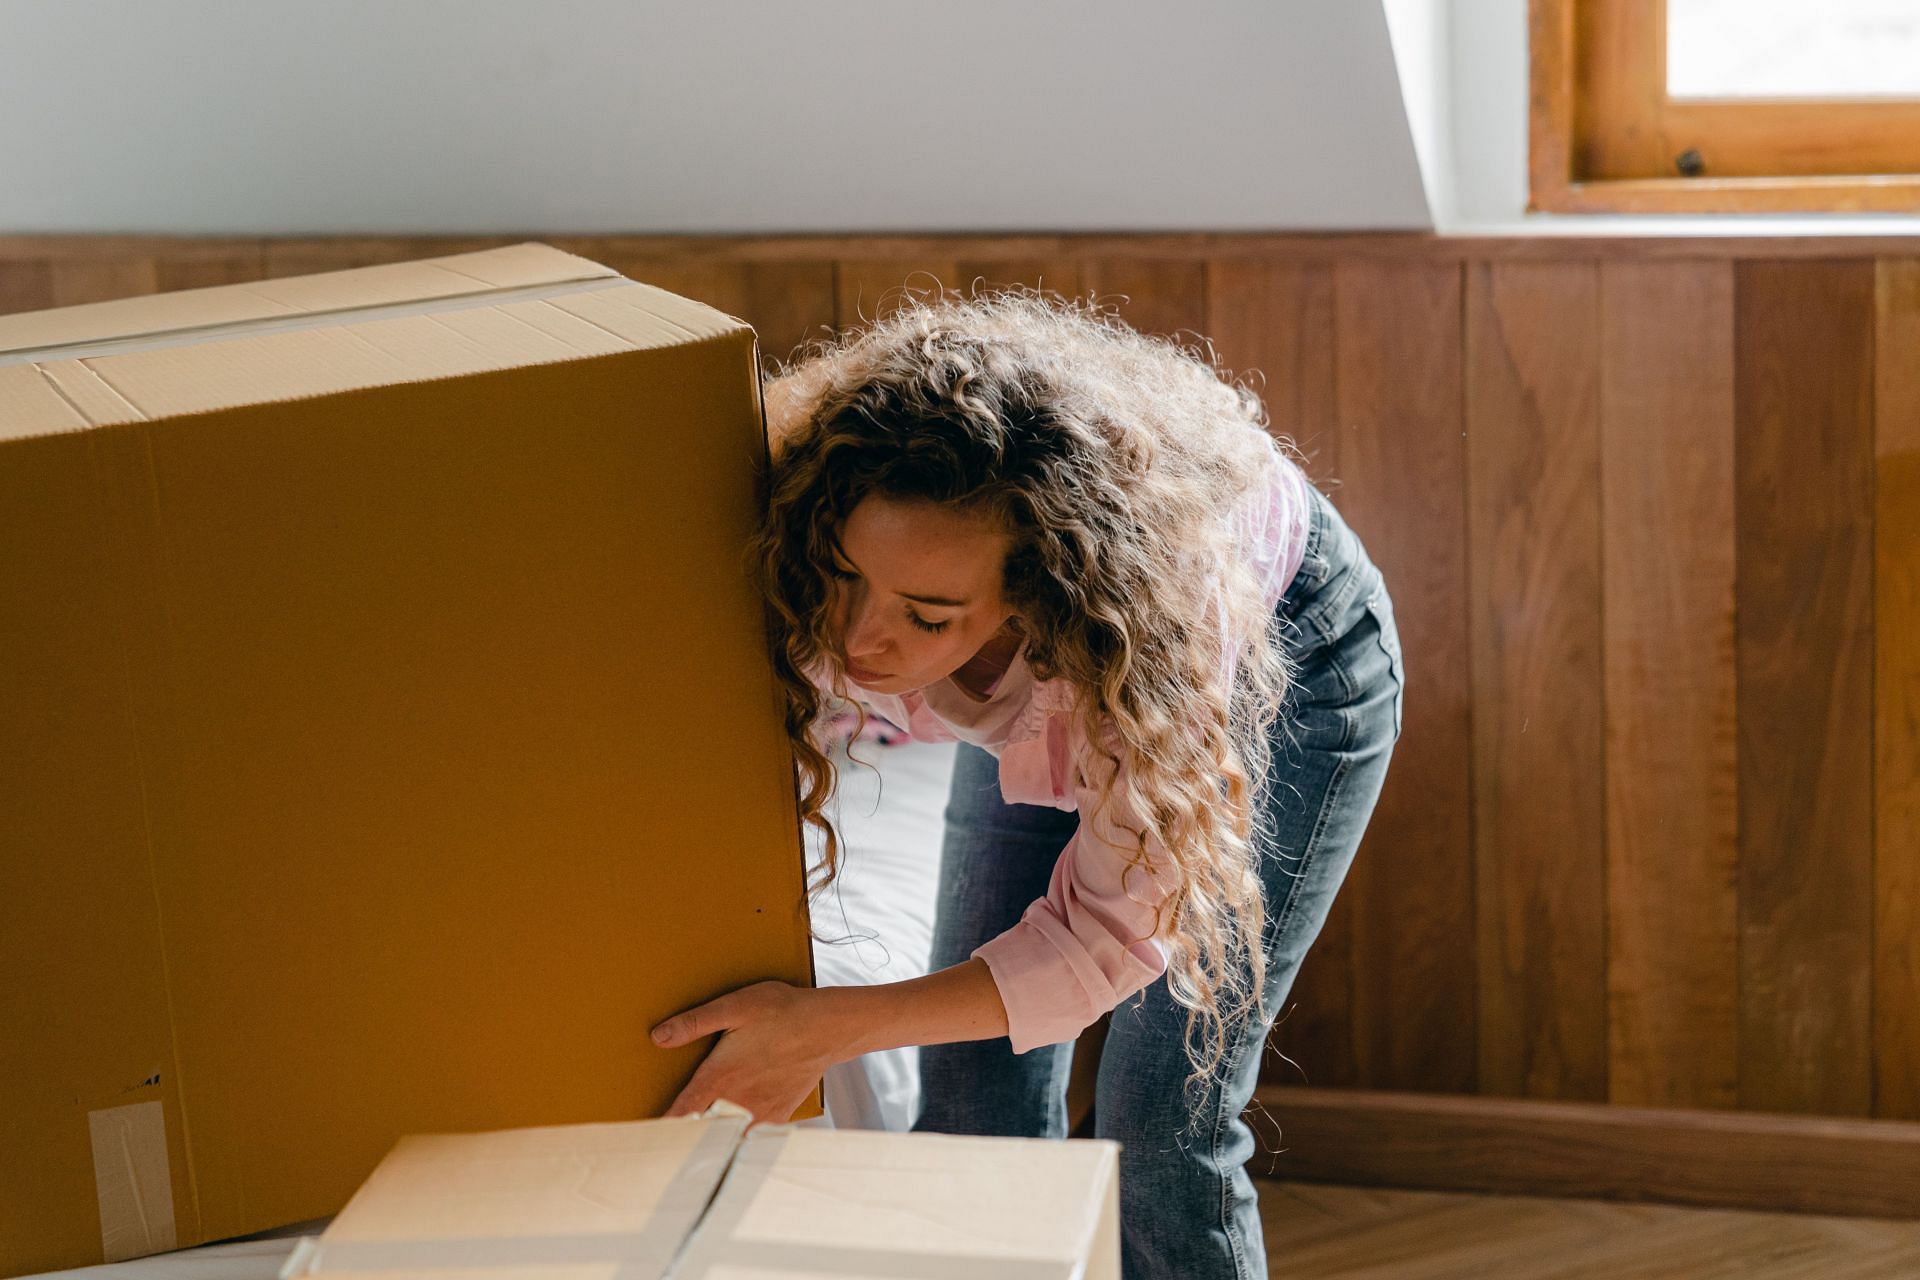 There can be many transitions a student can go through. Even moving to an extremely unfamilar space can be difficult. (Image via pexels/ Ketut)